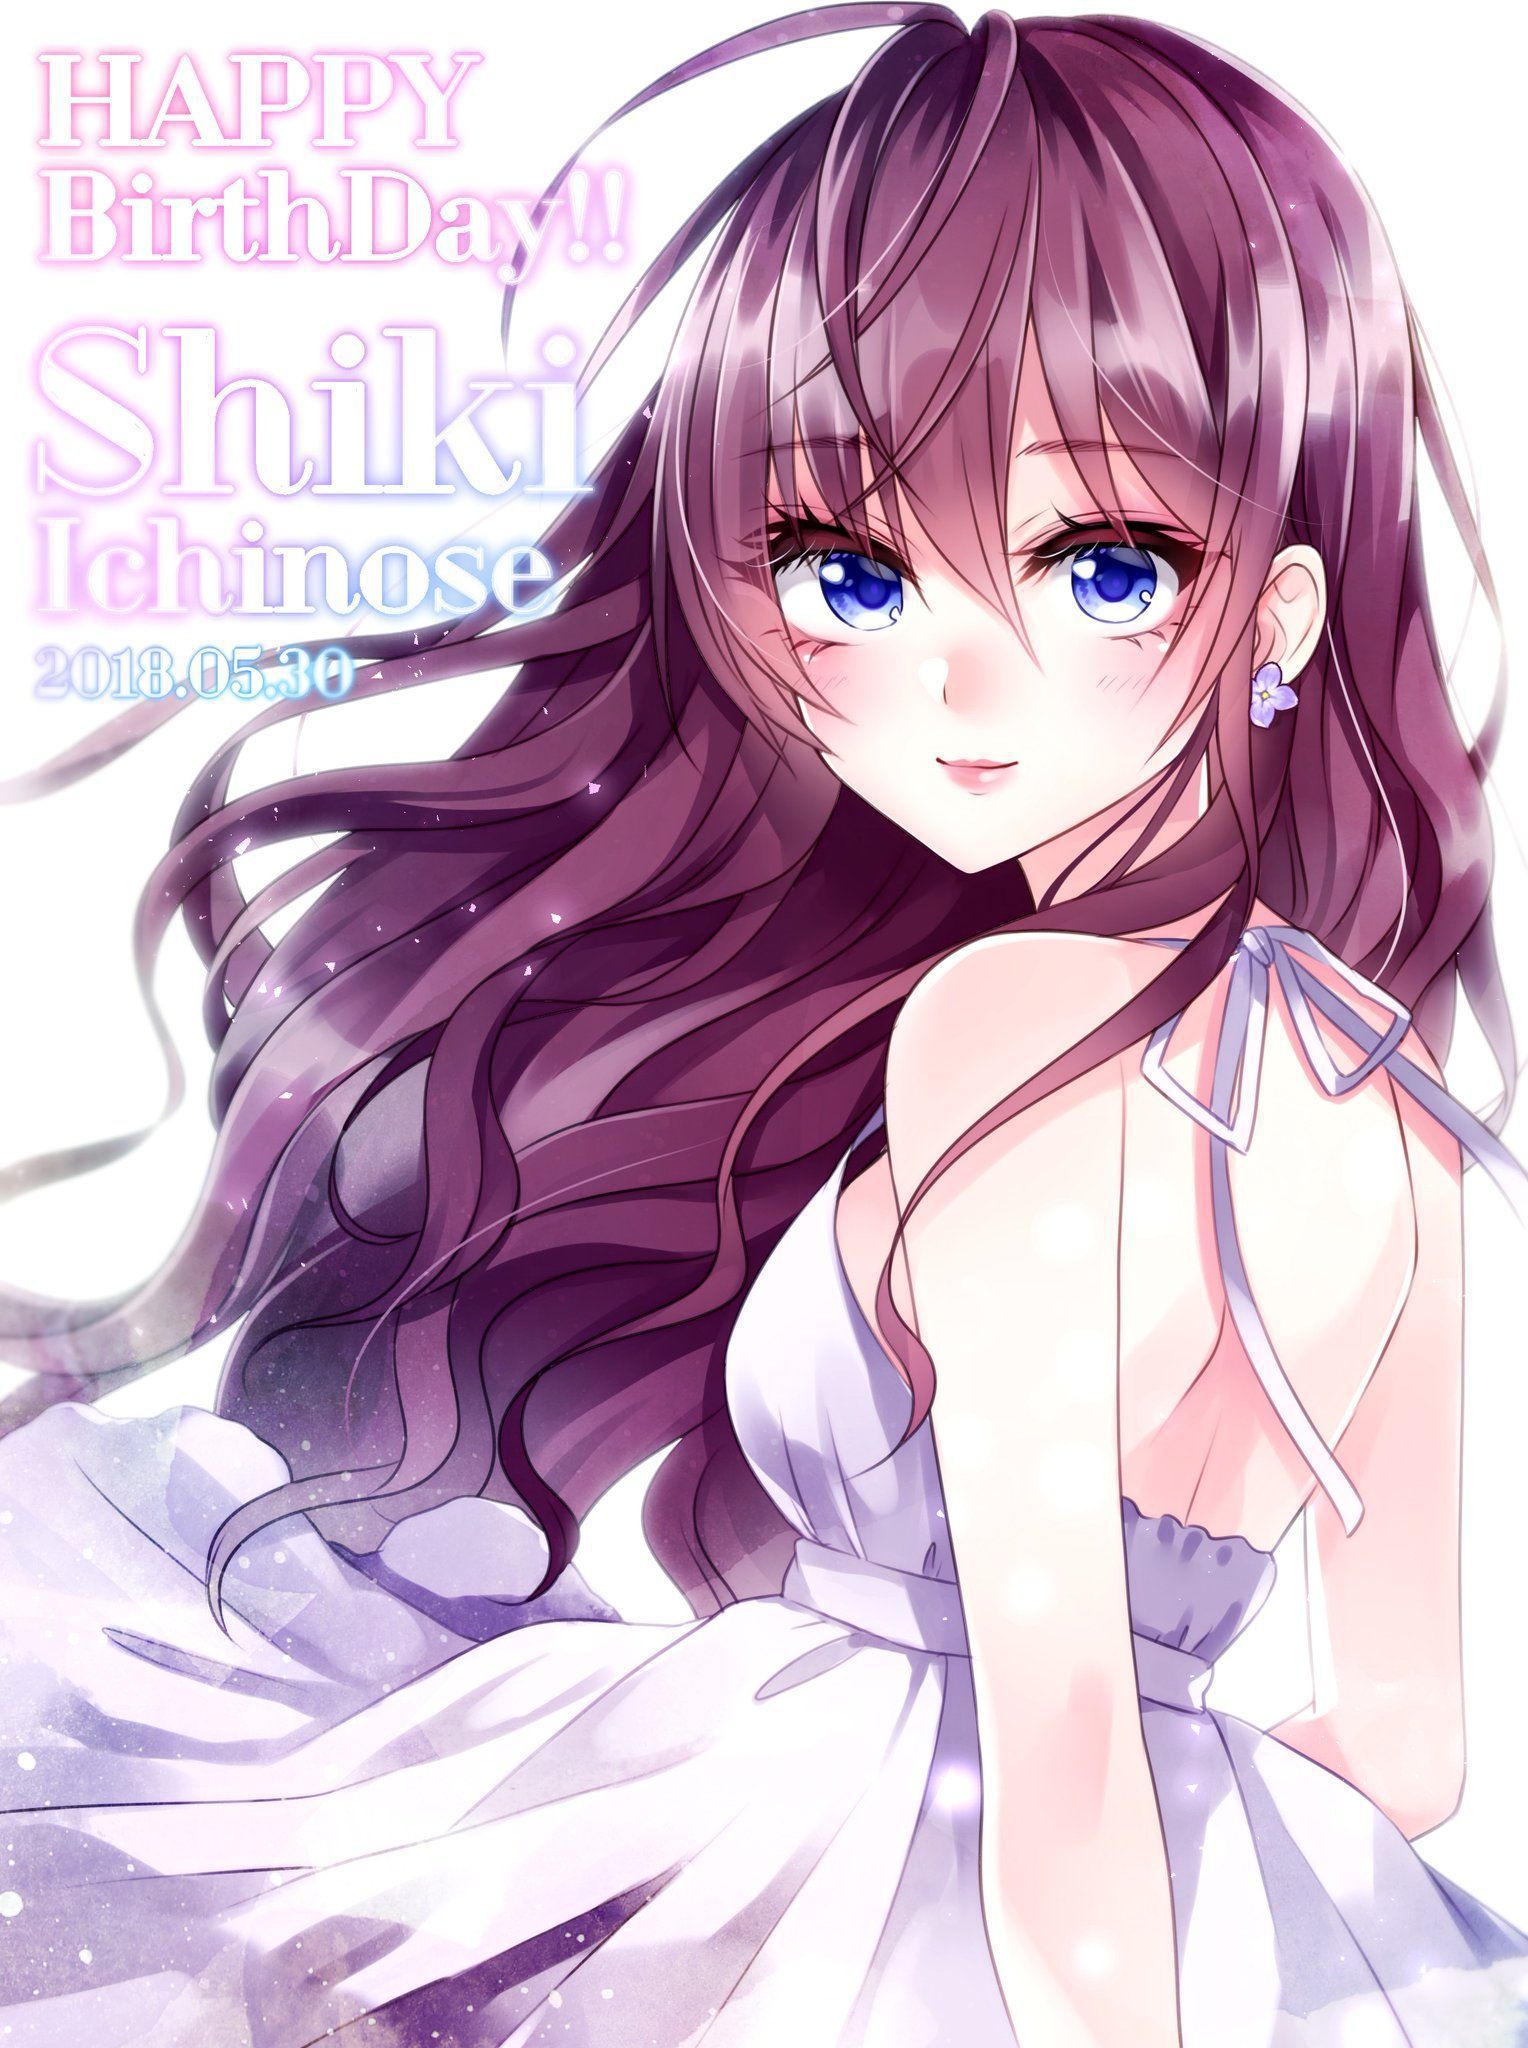 [Secondary, ZIP] smell fetish de mas, ichinose shiki cute picture summary 100 pieces 92